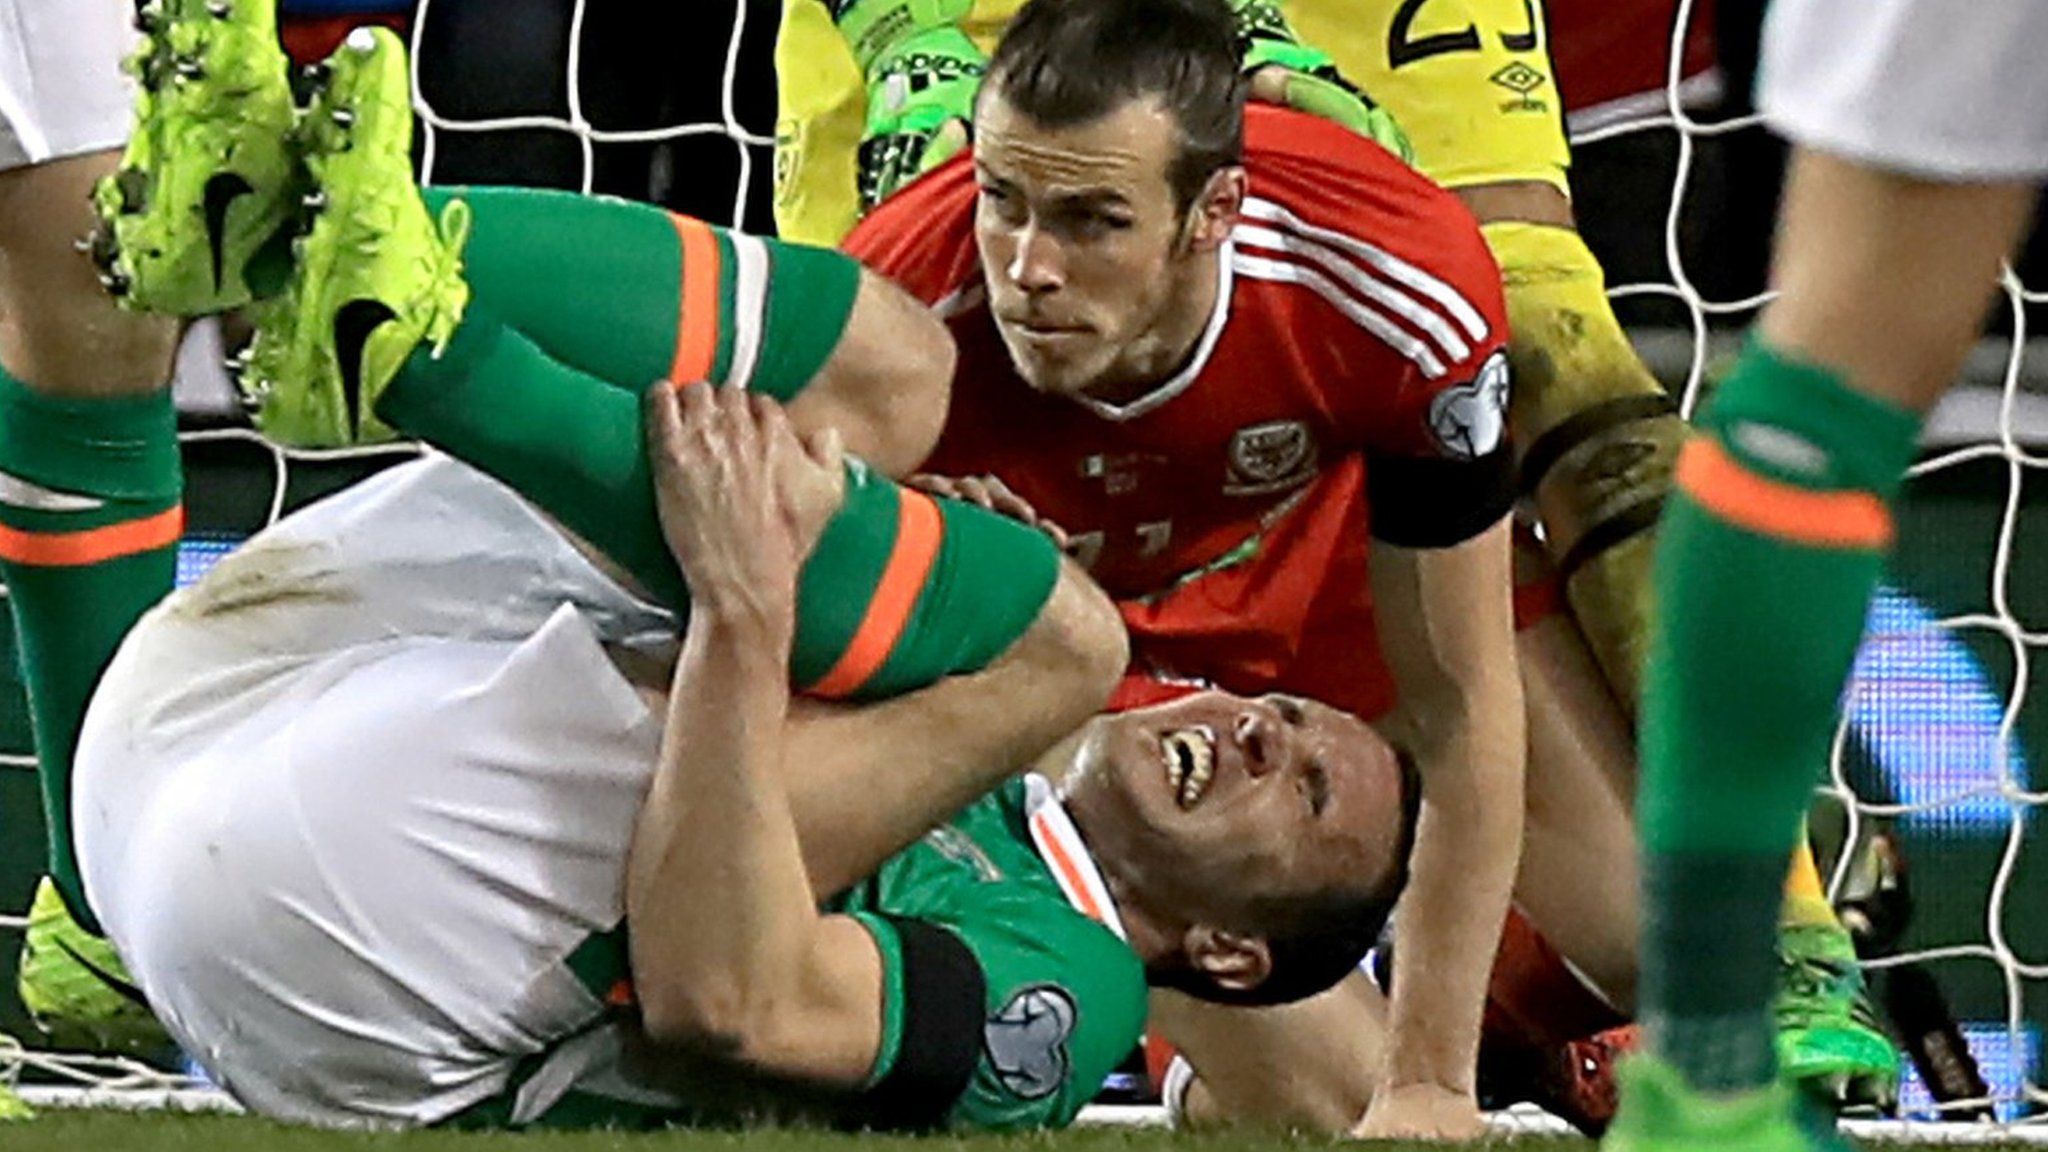 John O'Shea looks in severe pain after the tackle by Gareth Bale